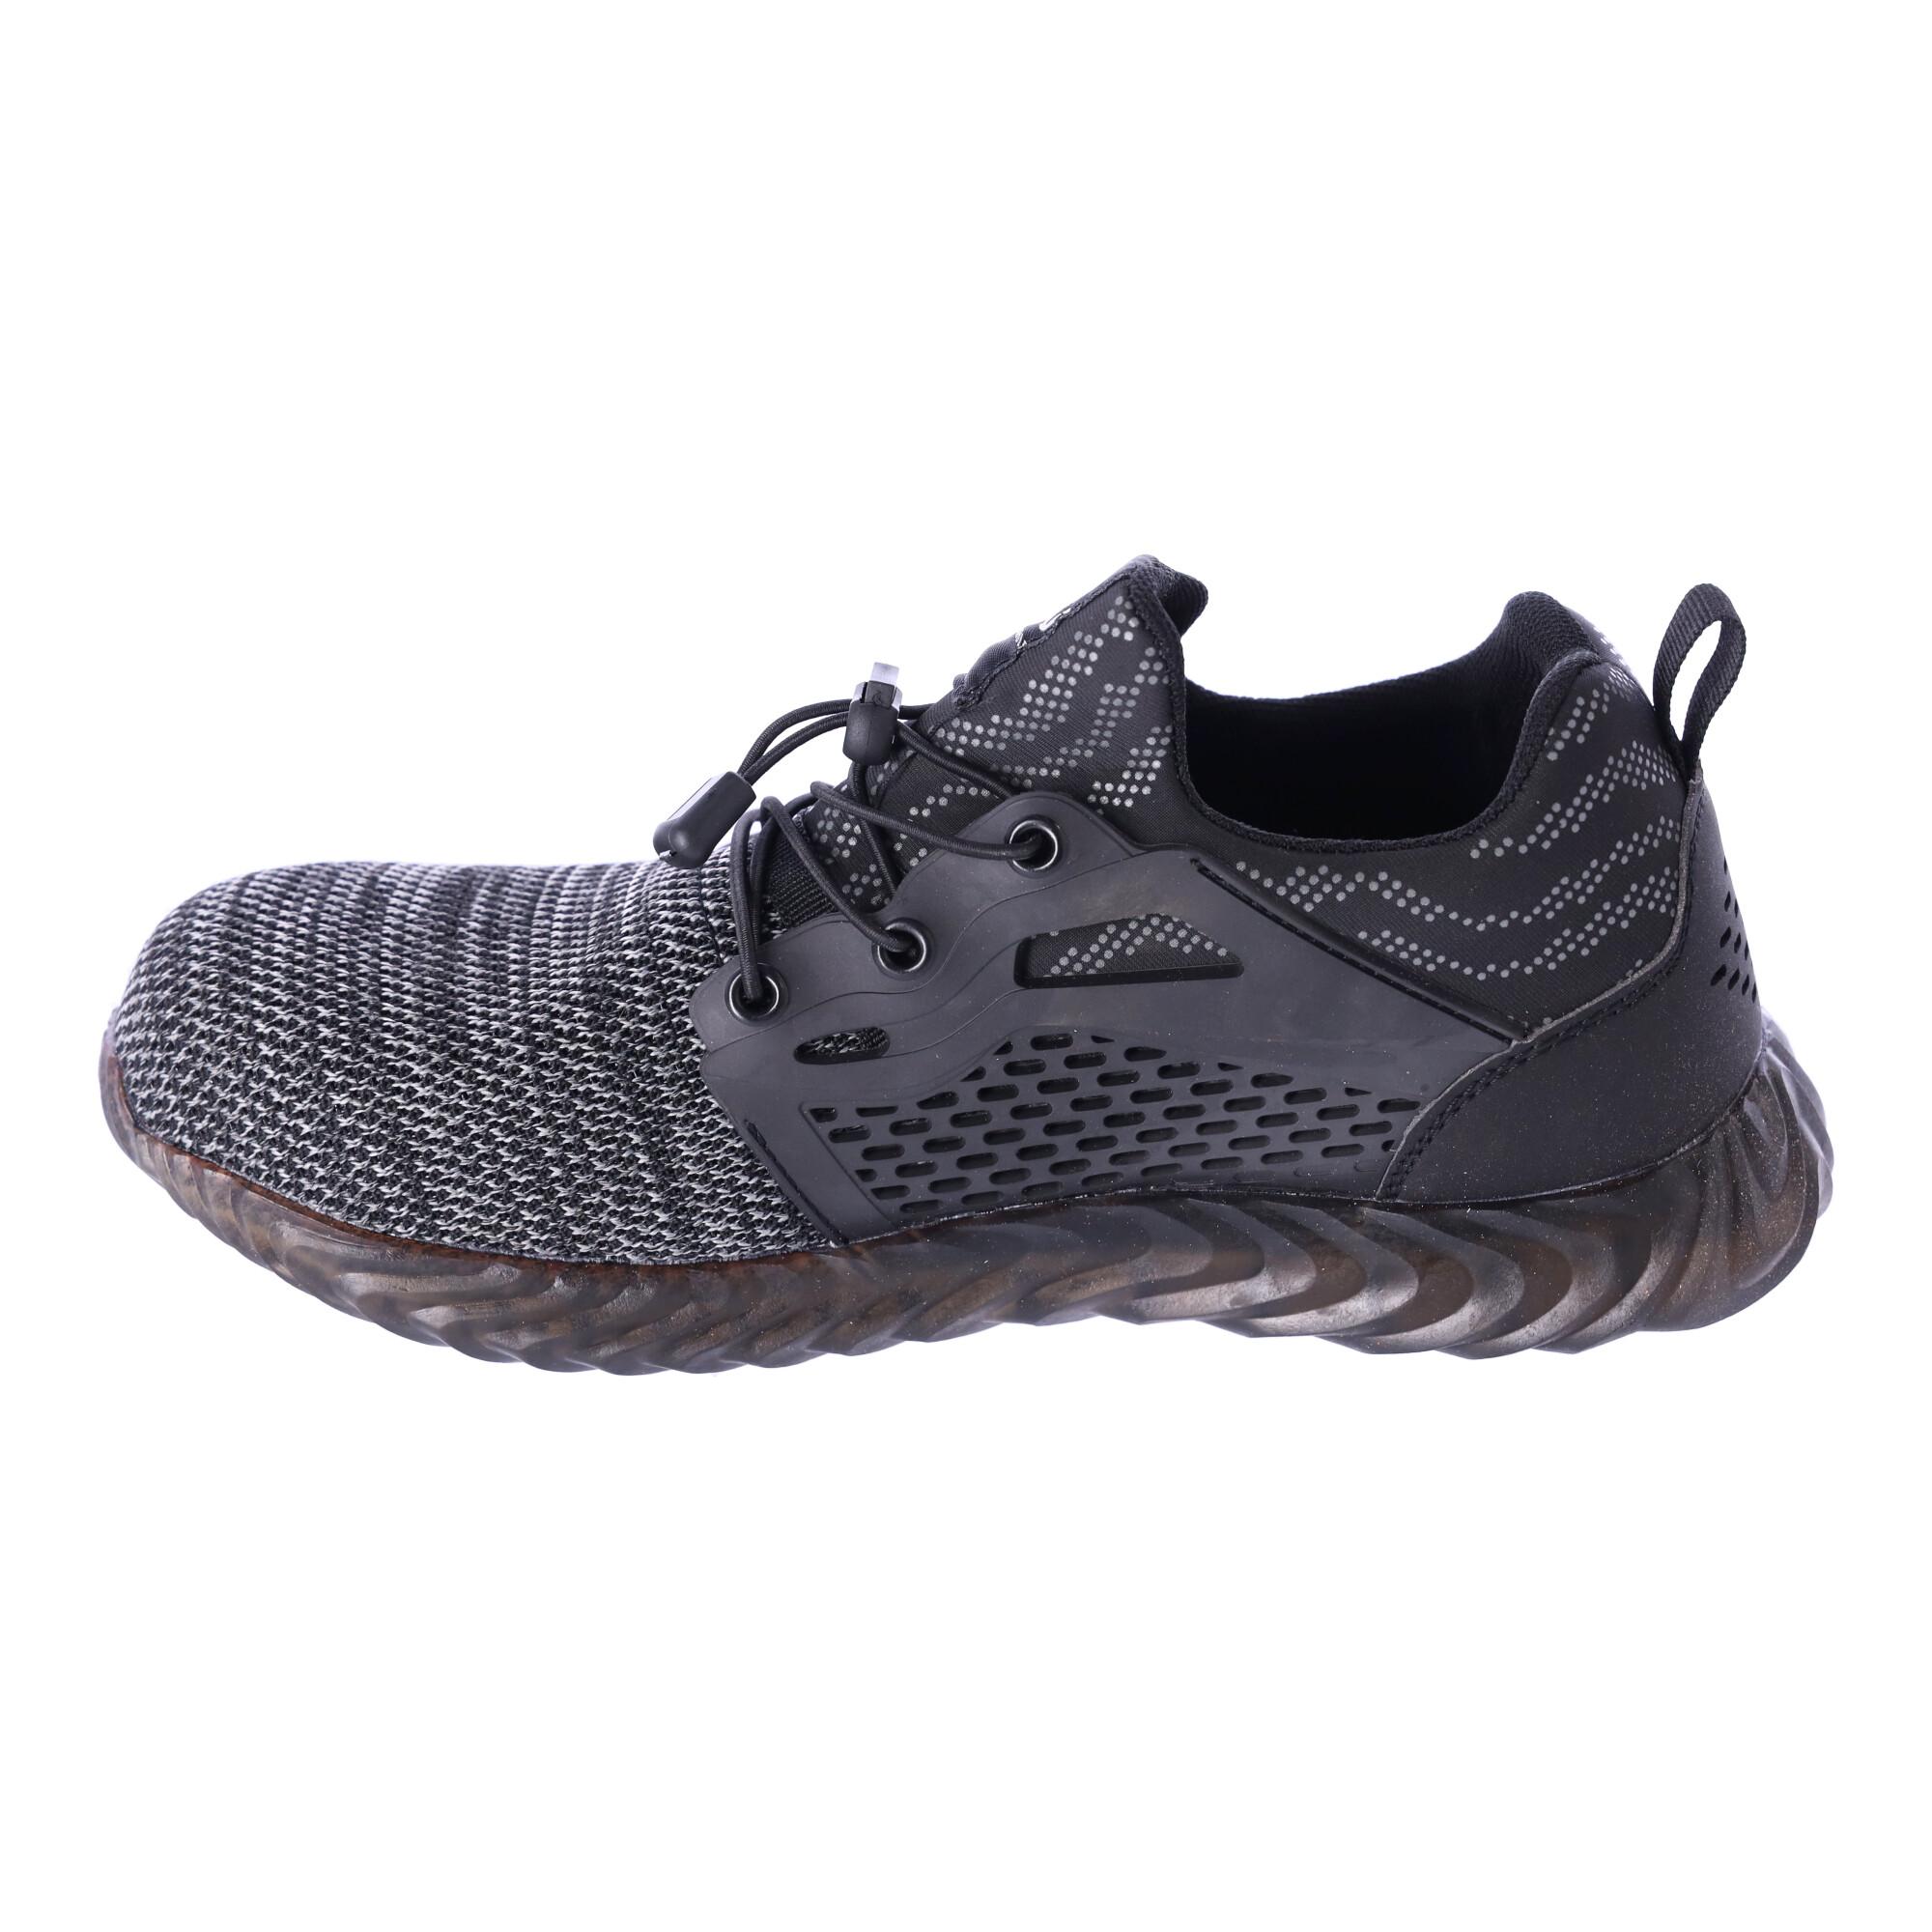 Work safety shoes "46" - gray